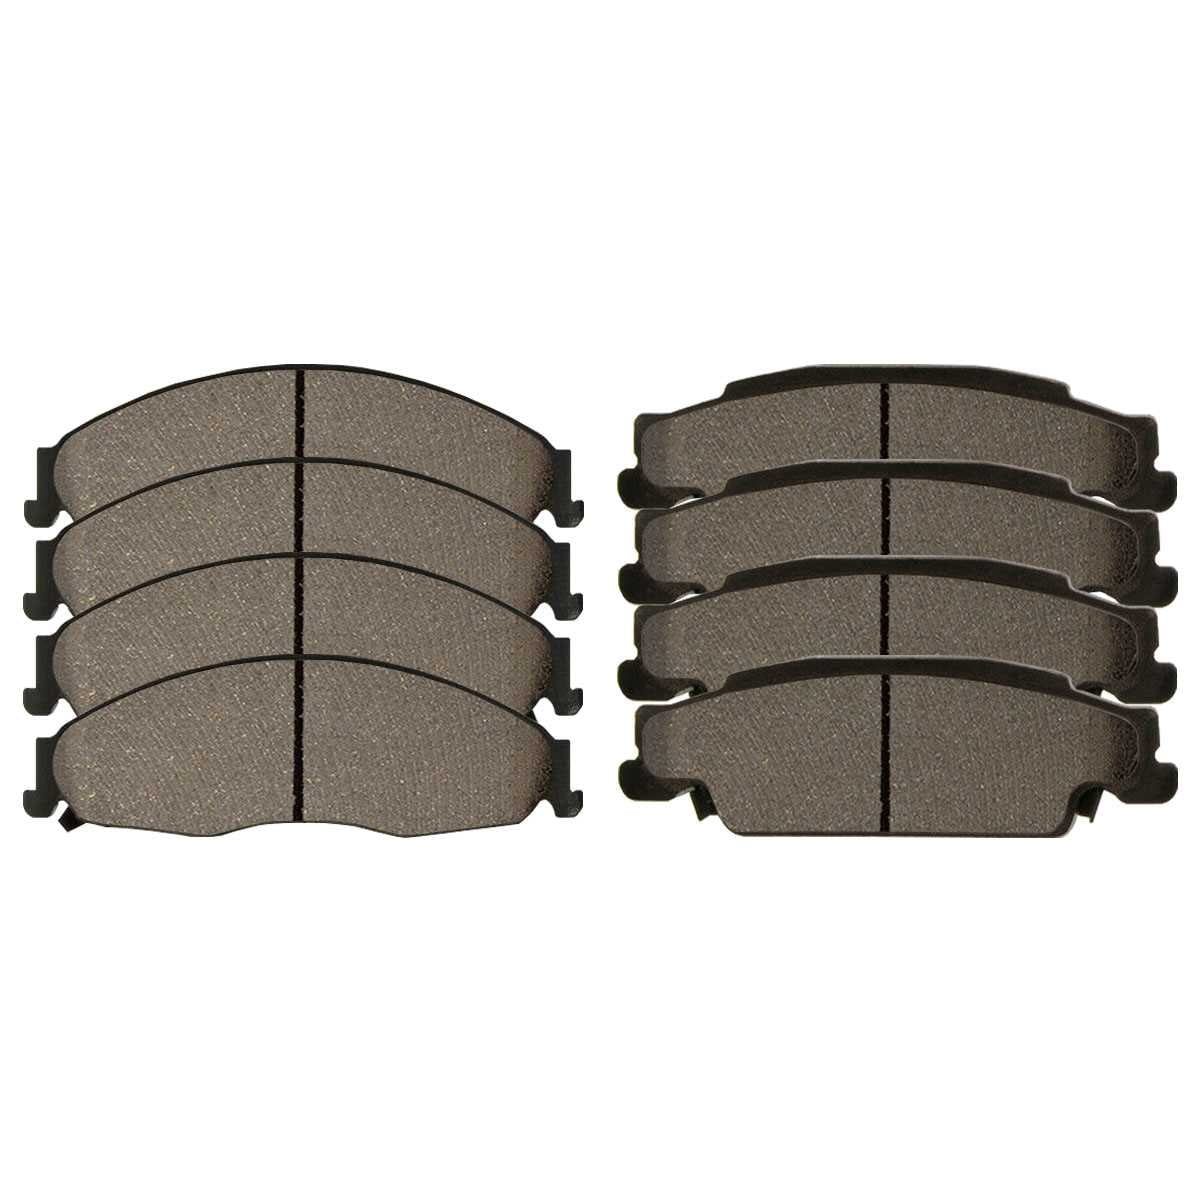 FITS 2003 2004 2005 CADILLAC CTS SPORT Ceramic Brake Pads FRONT